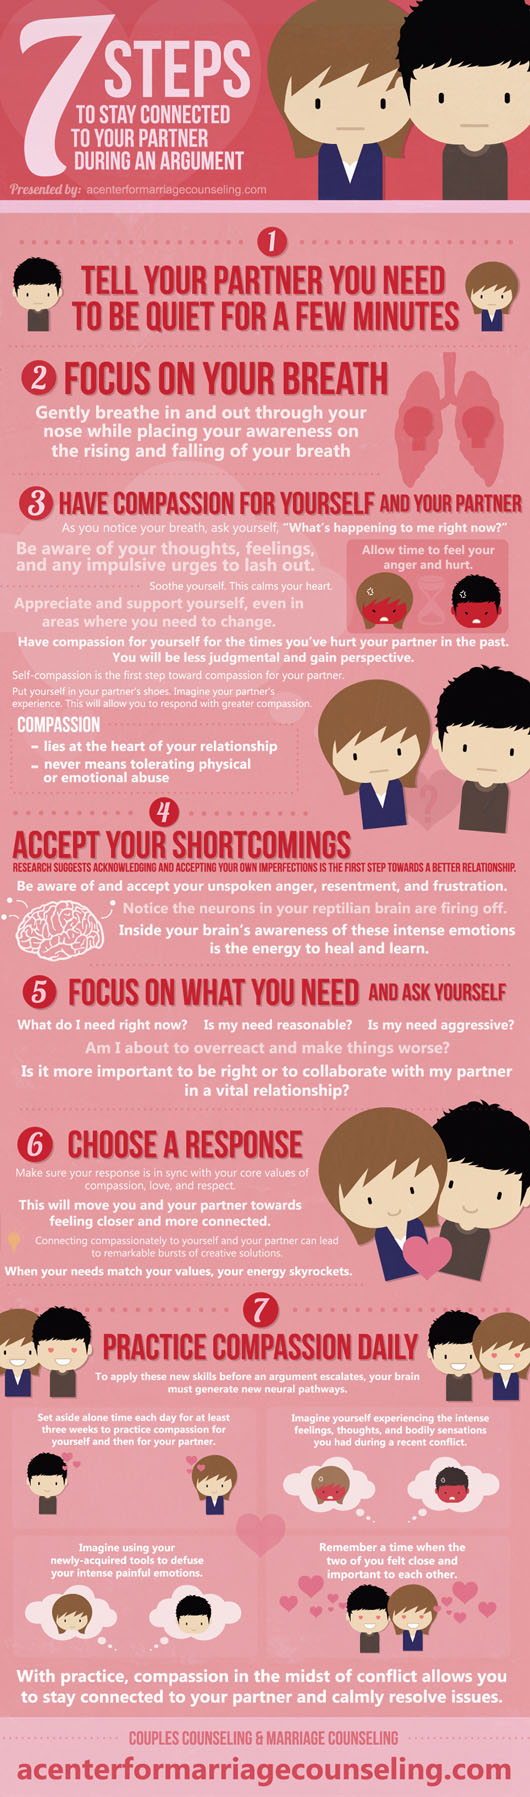 7 Steps to Stay Connected to Your Partner During an Argument